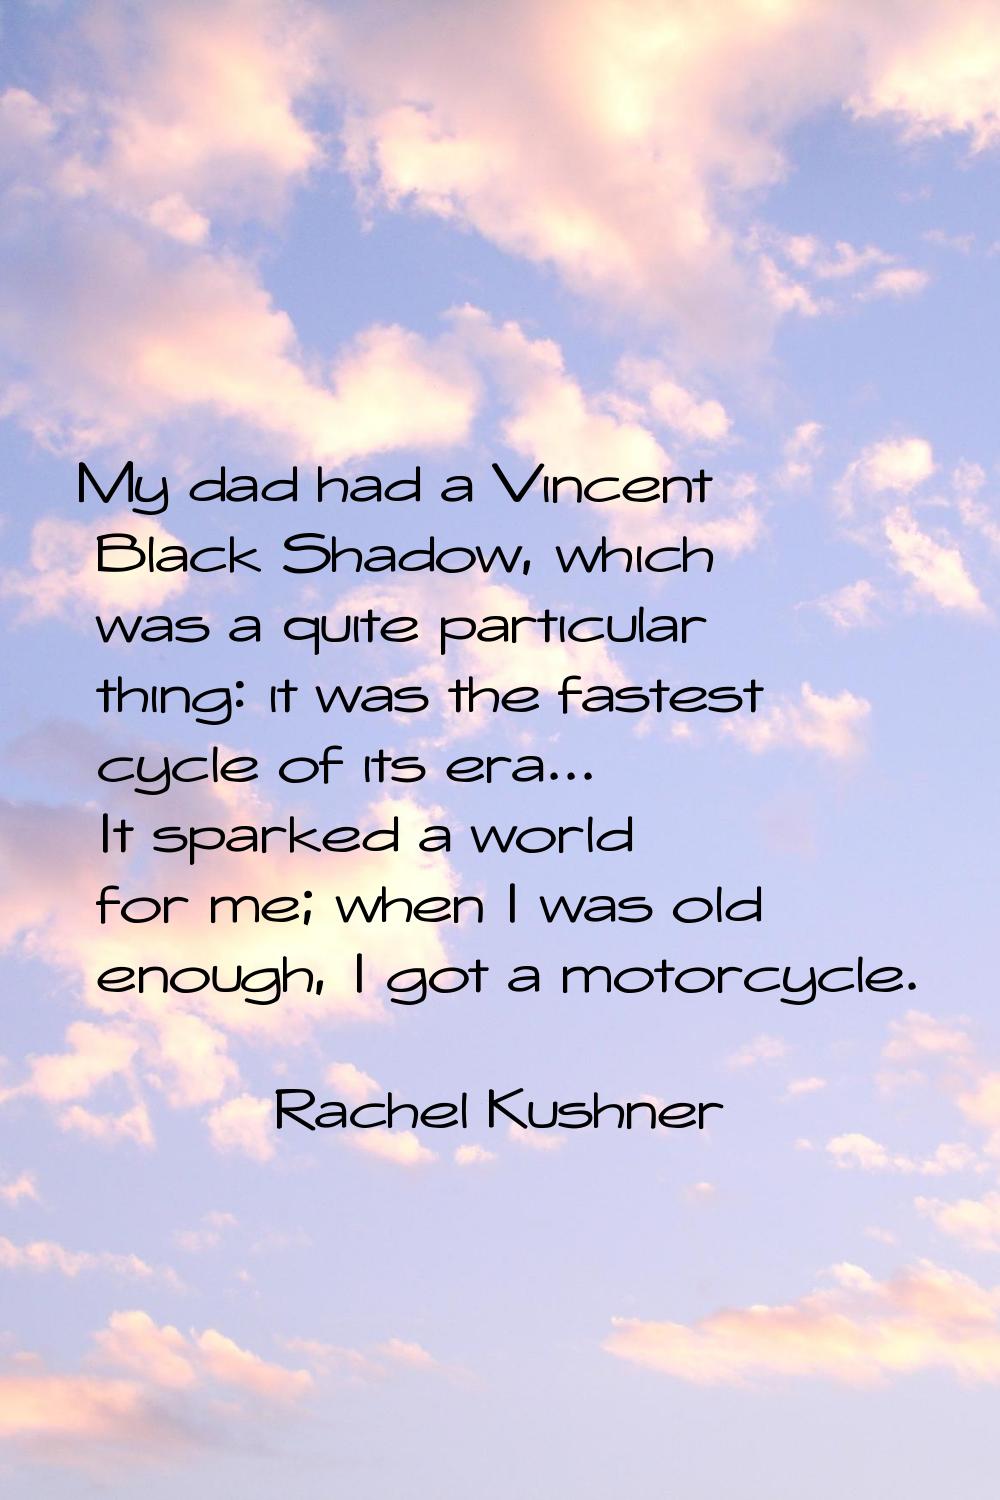 My dad had a Vincent Black Shadow, which was a quite particular thing: it was the fastest cycle of 